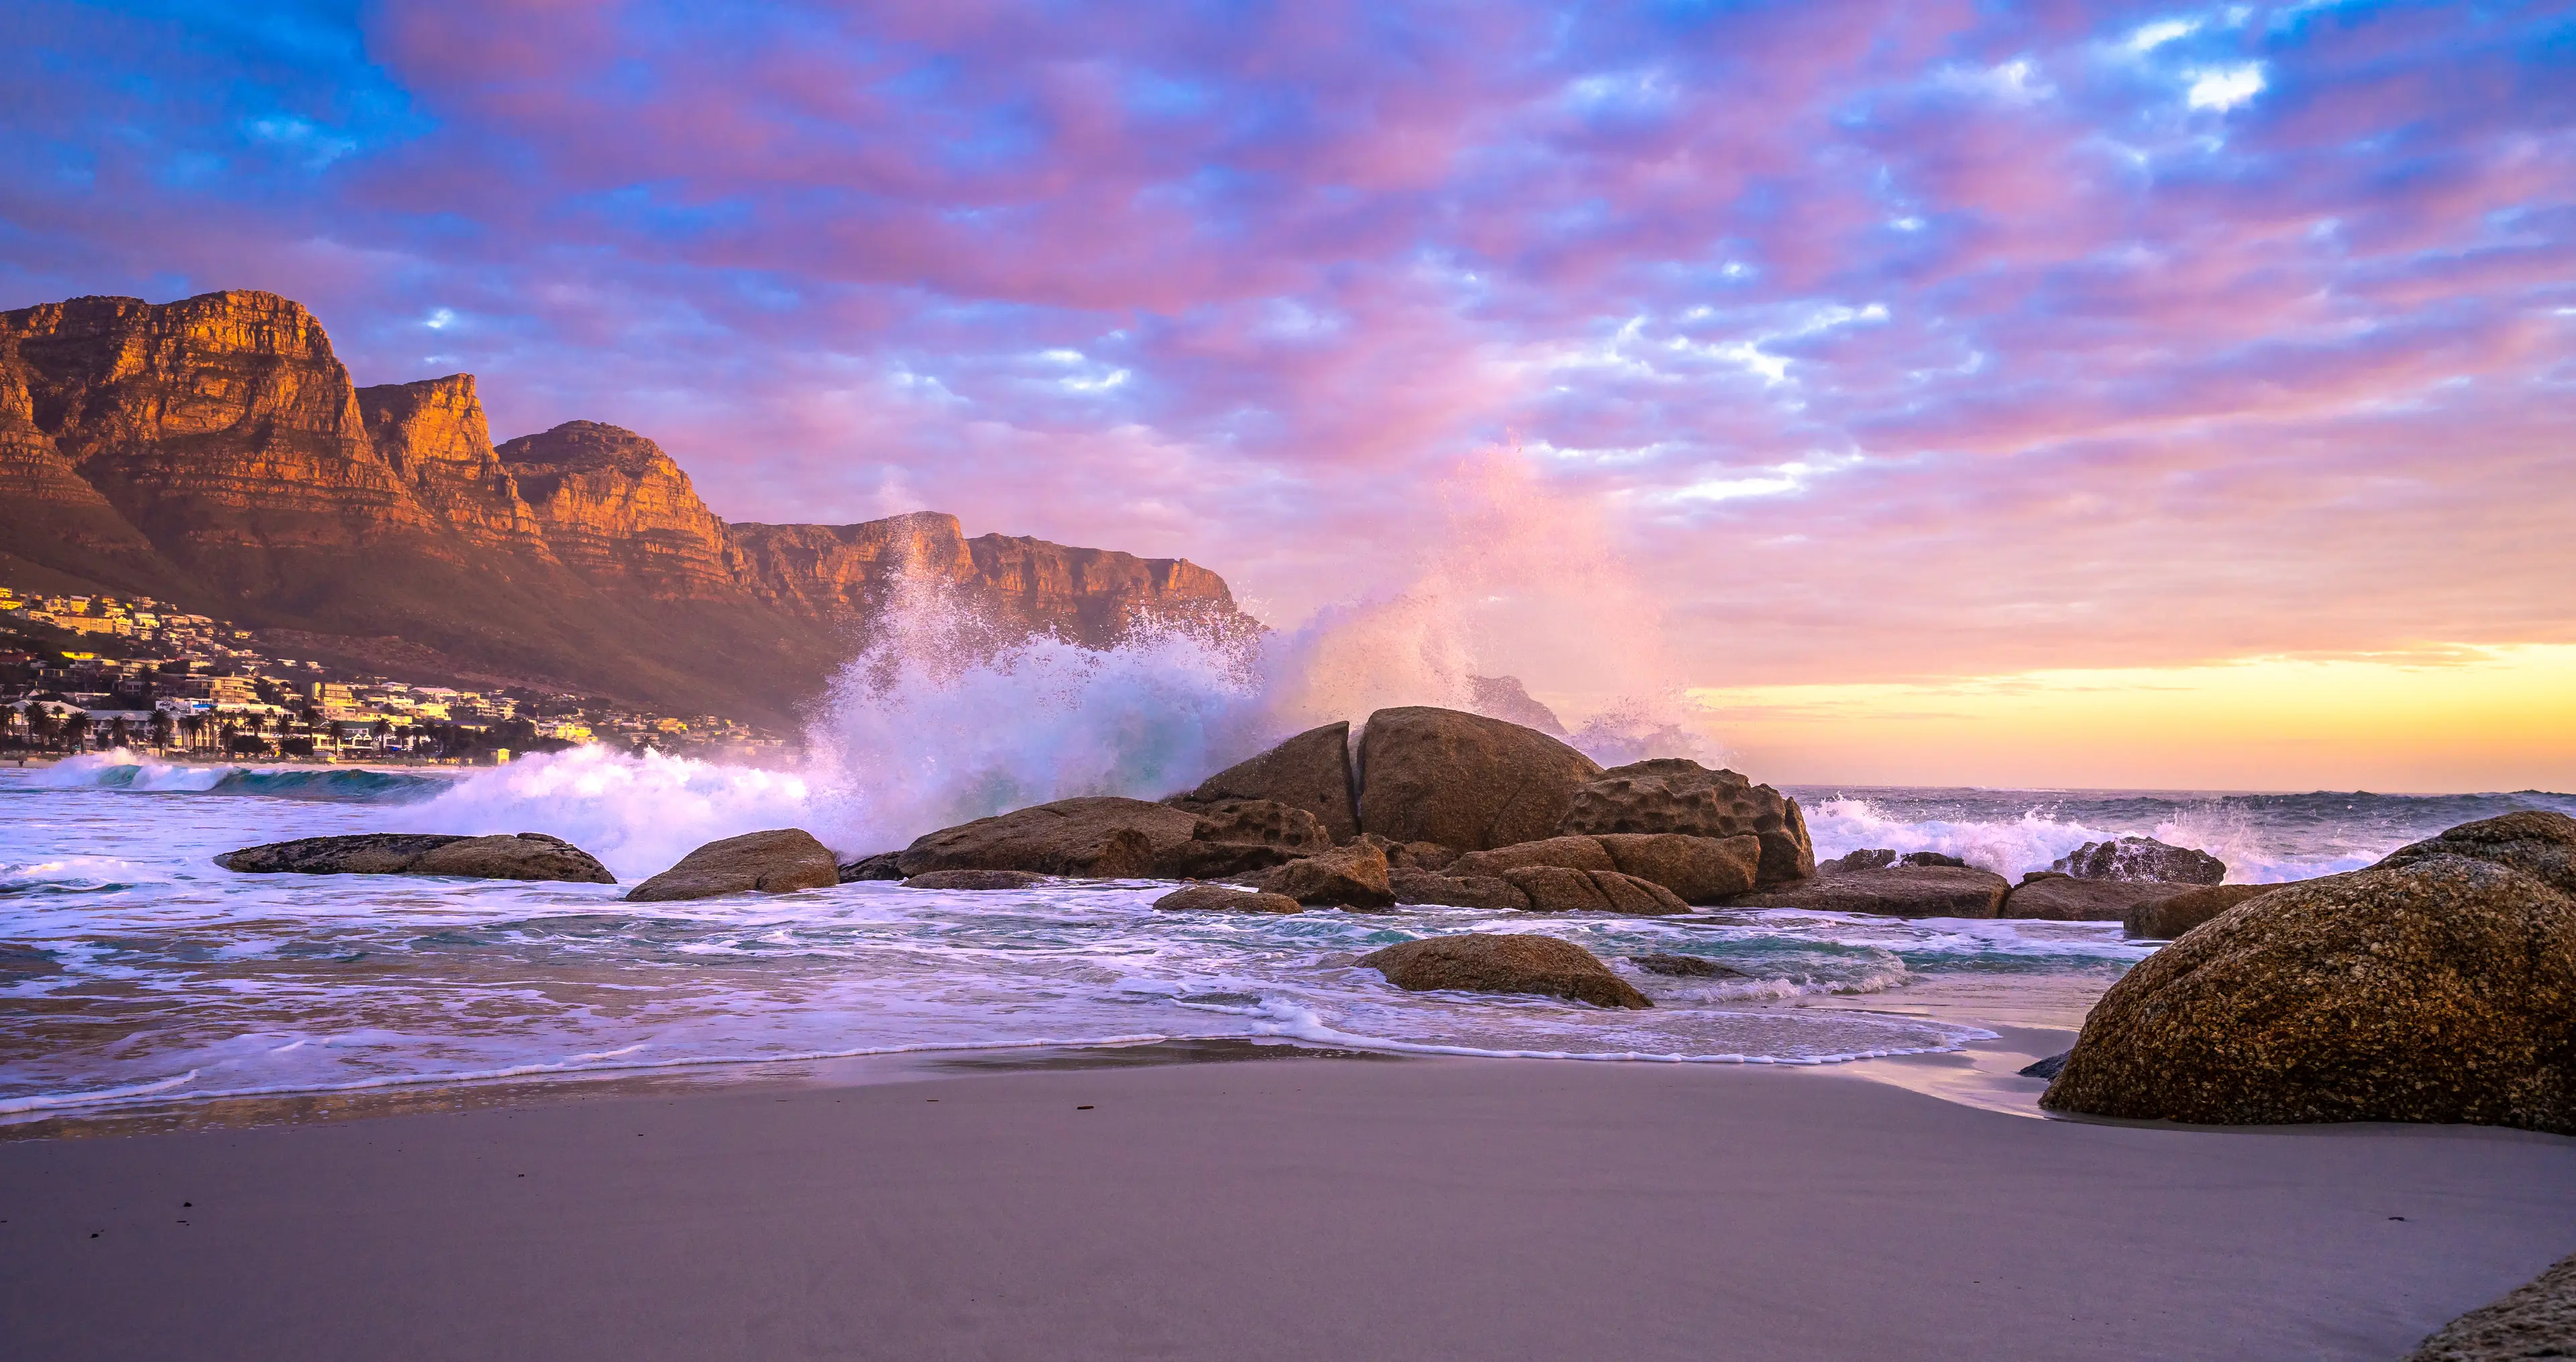 4-Day Exquisite Itinerary for Cape Town, South Africa